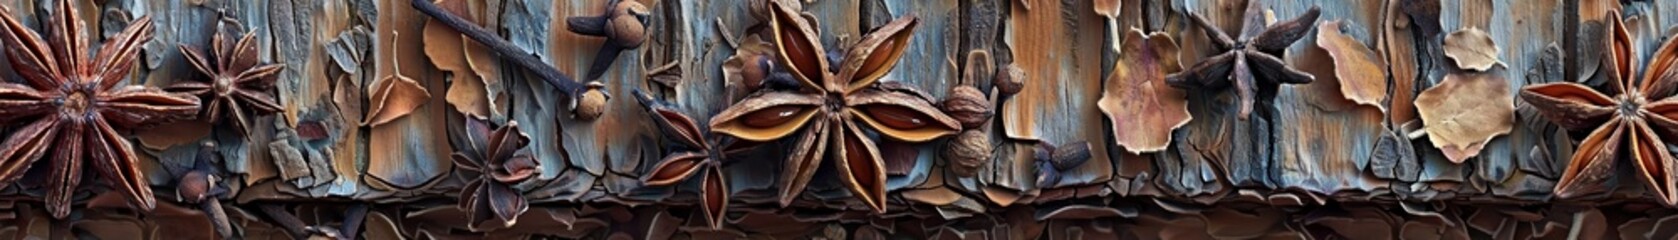 Kaleidoscope of spices Cloves cinnamon star anise macro rich textures on rustic wood